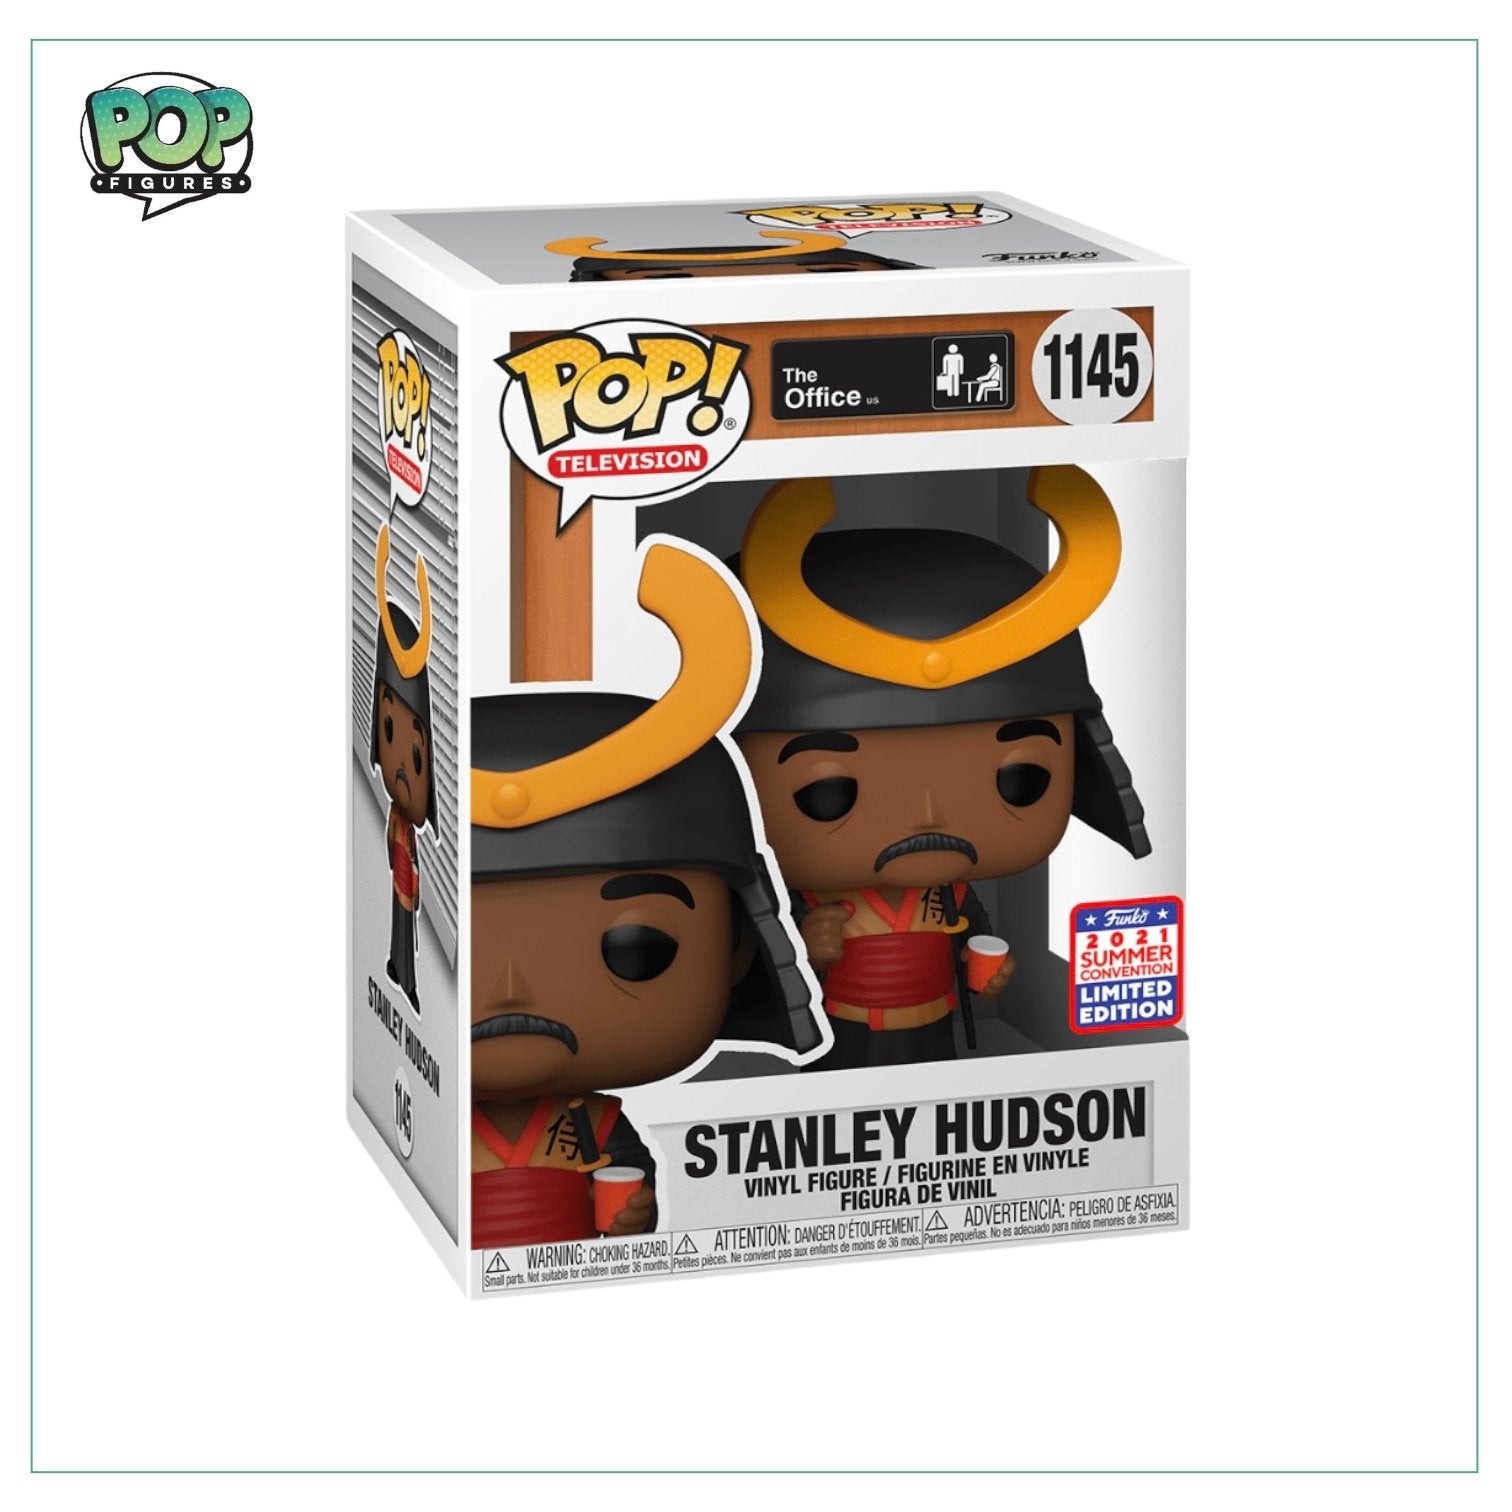 Stanley Hudson #1145 Funko Pop! The Office, 2021 Virtual Funkon (Shared Sticker) - Angry Cat